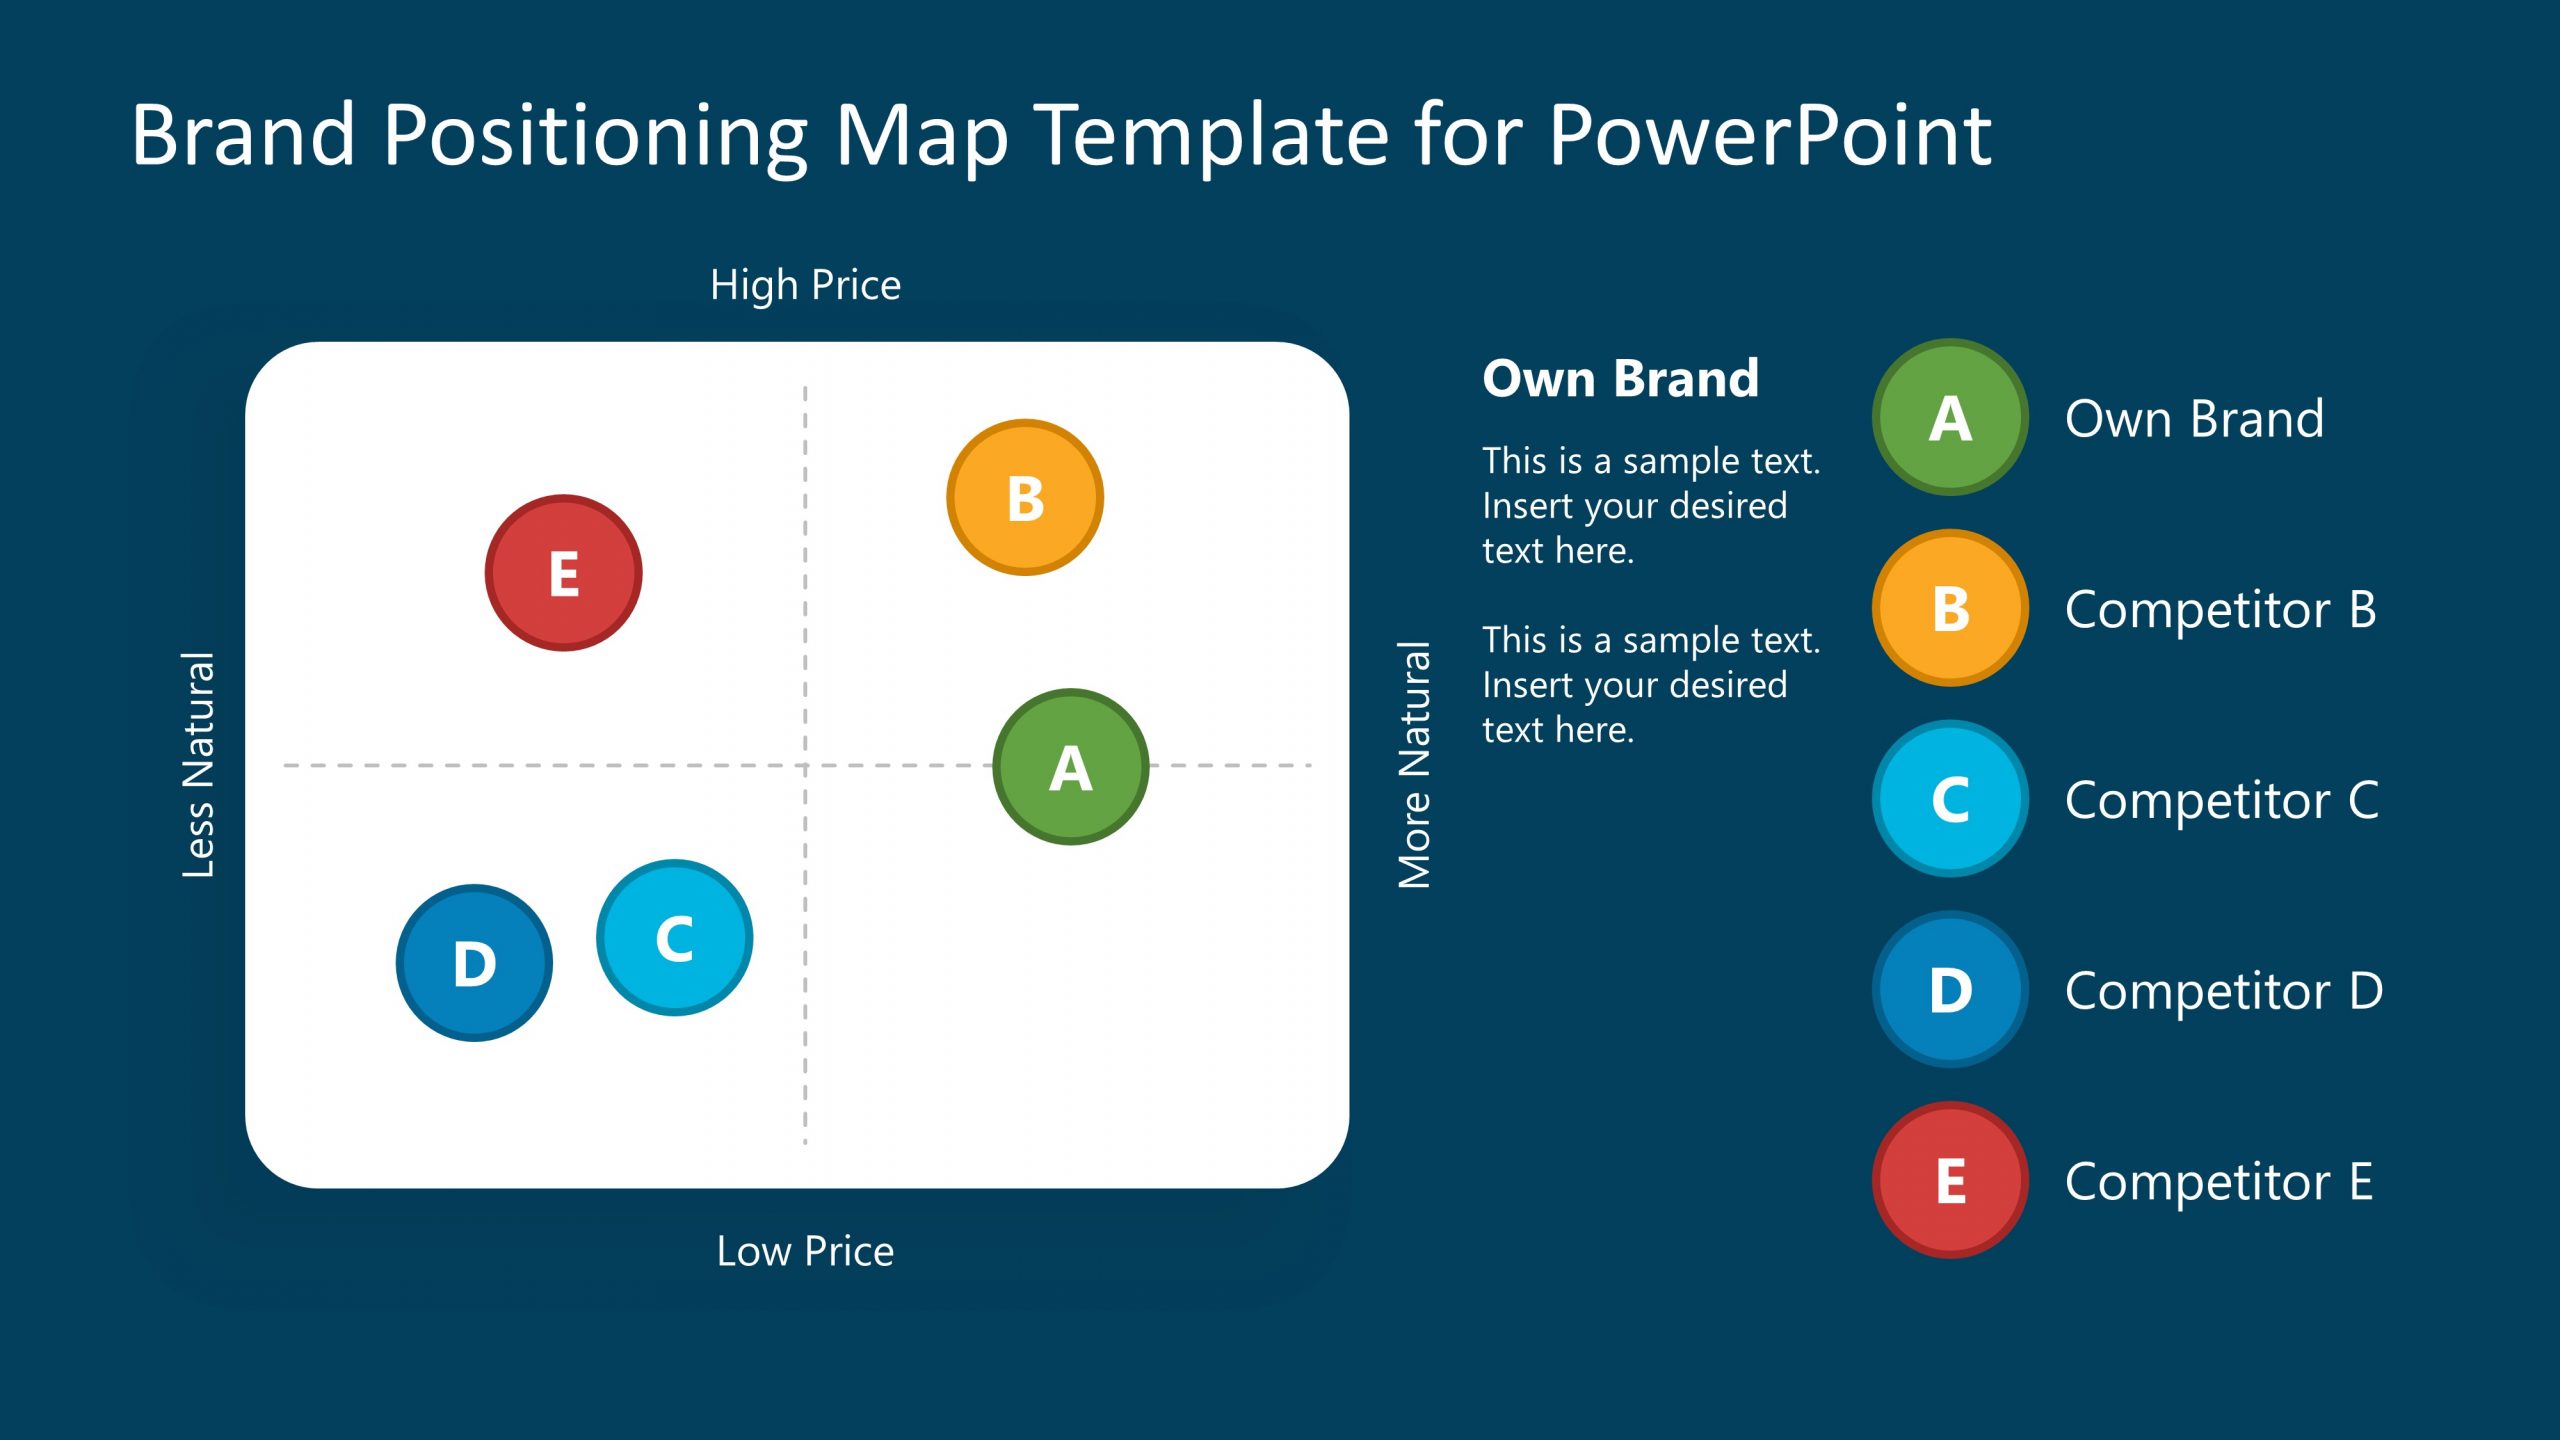 PowerPoint Template for Brand Positioning and Strategy Designing